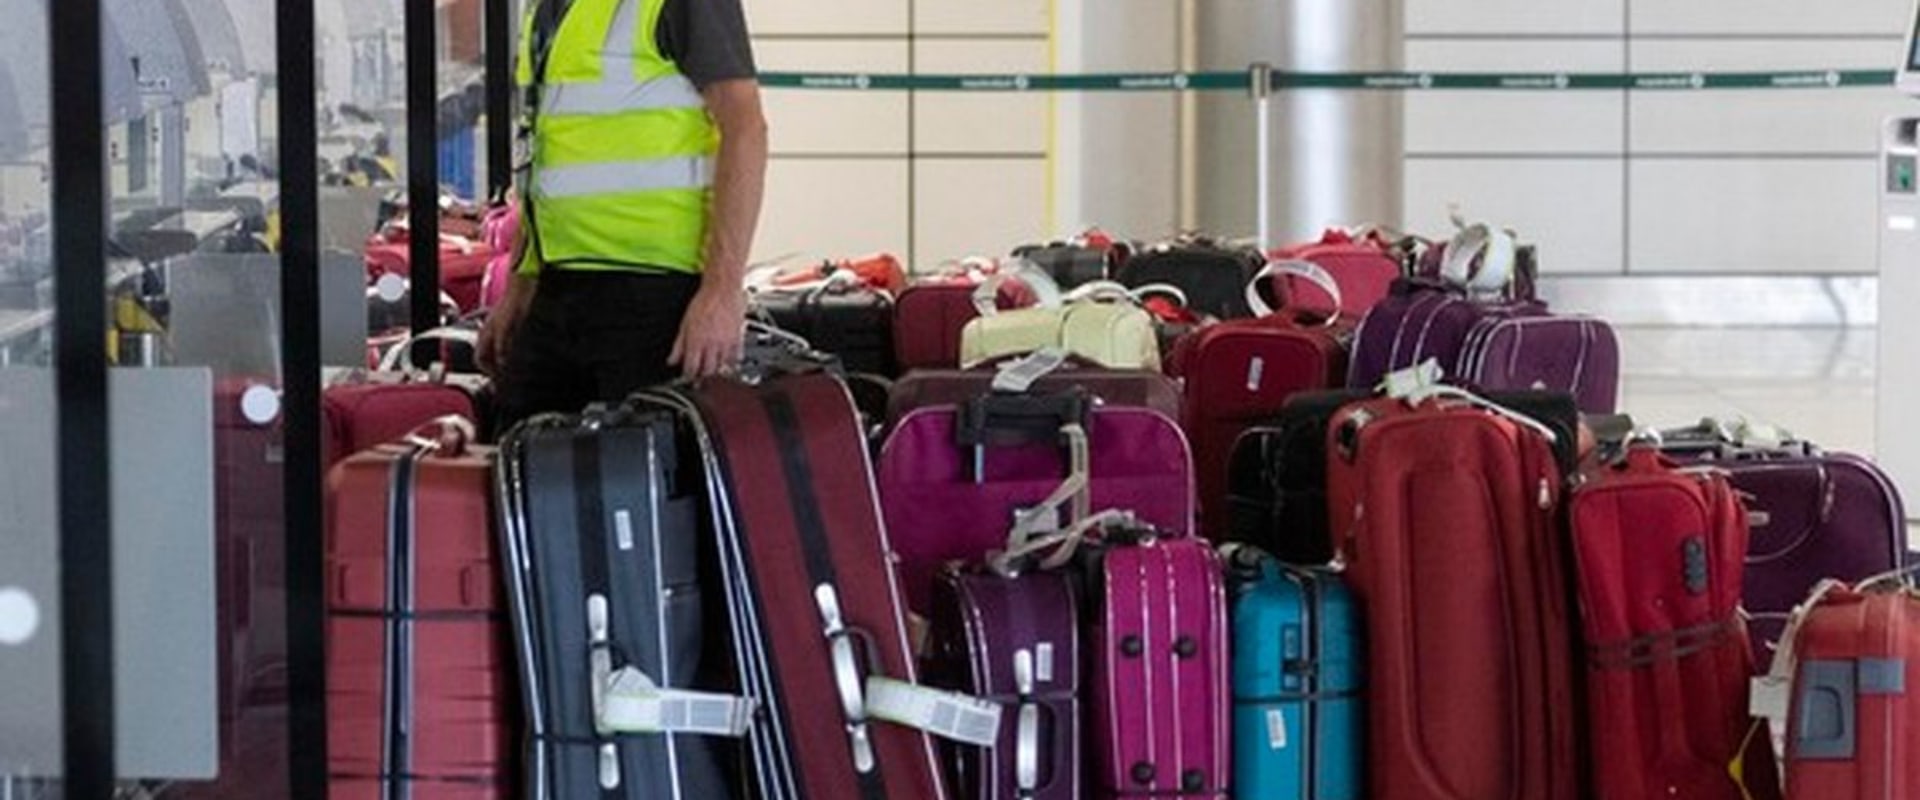 How much is it to leave luggage at dublin airport?